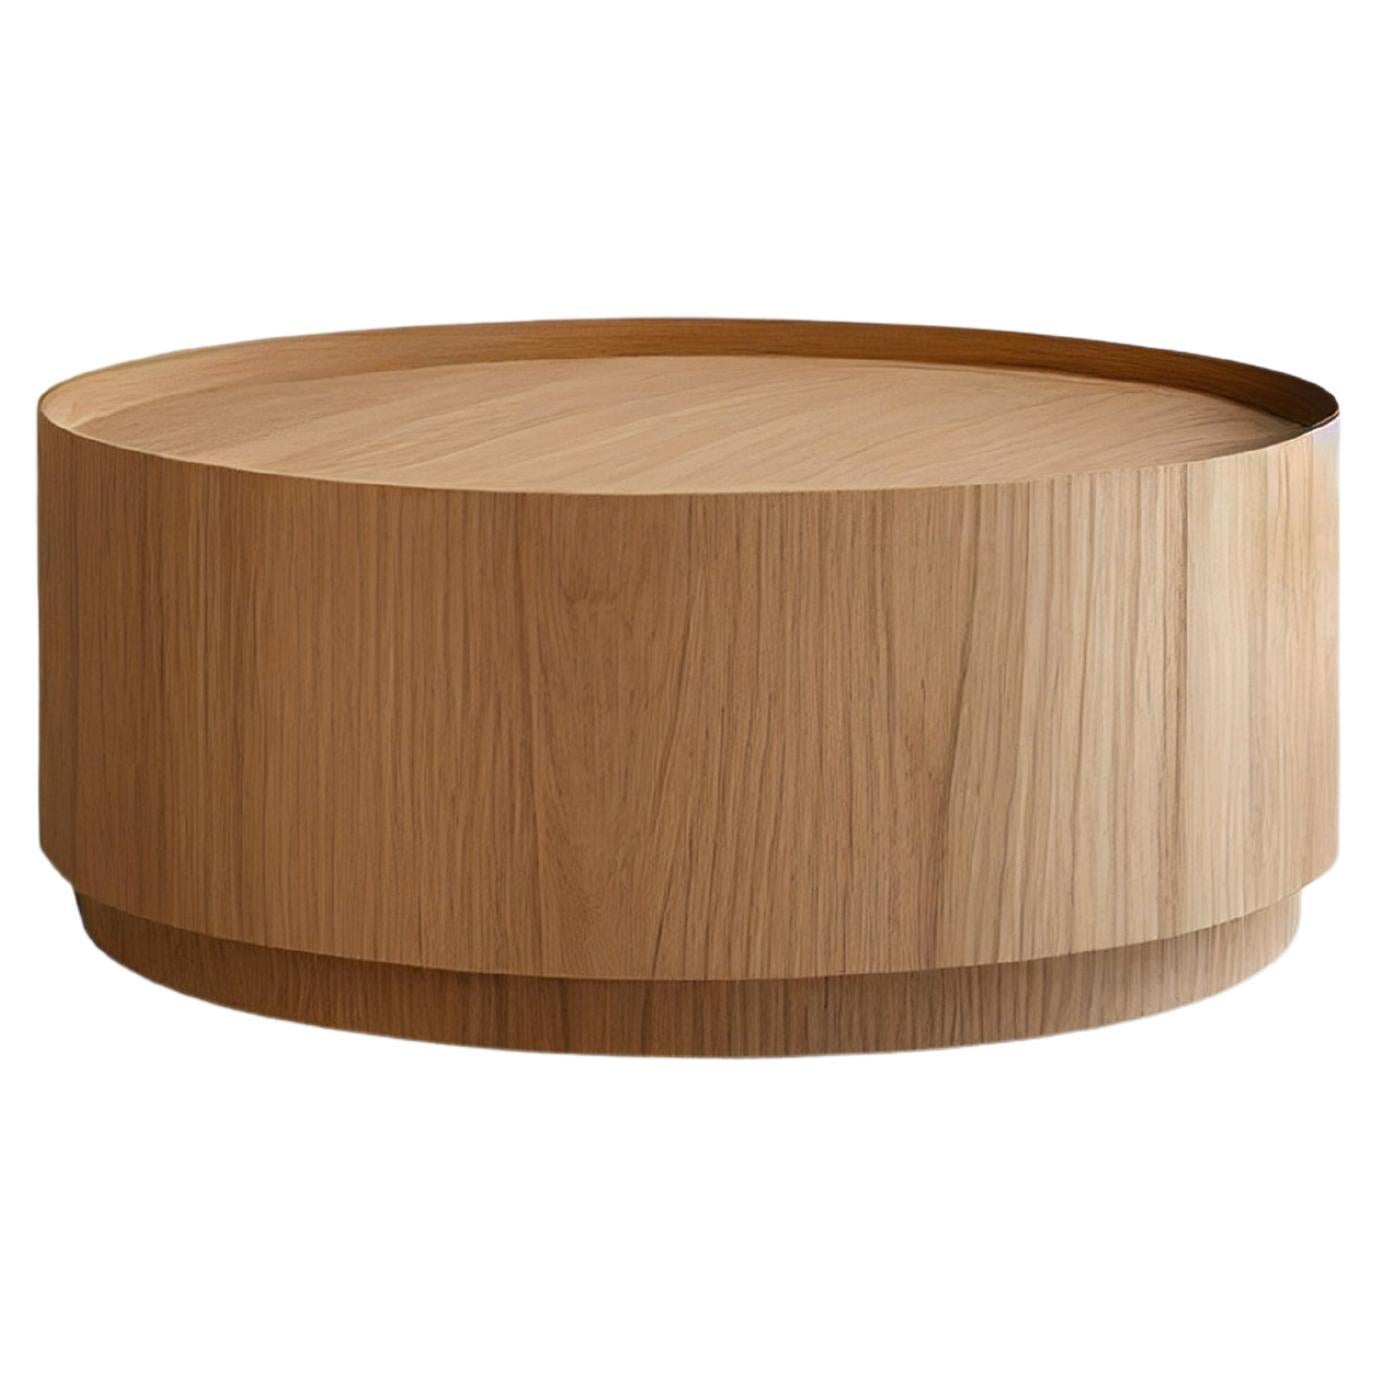 Round Coffee Table Made of Oak Veneer by Nono Furniture For Sale